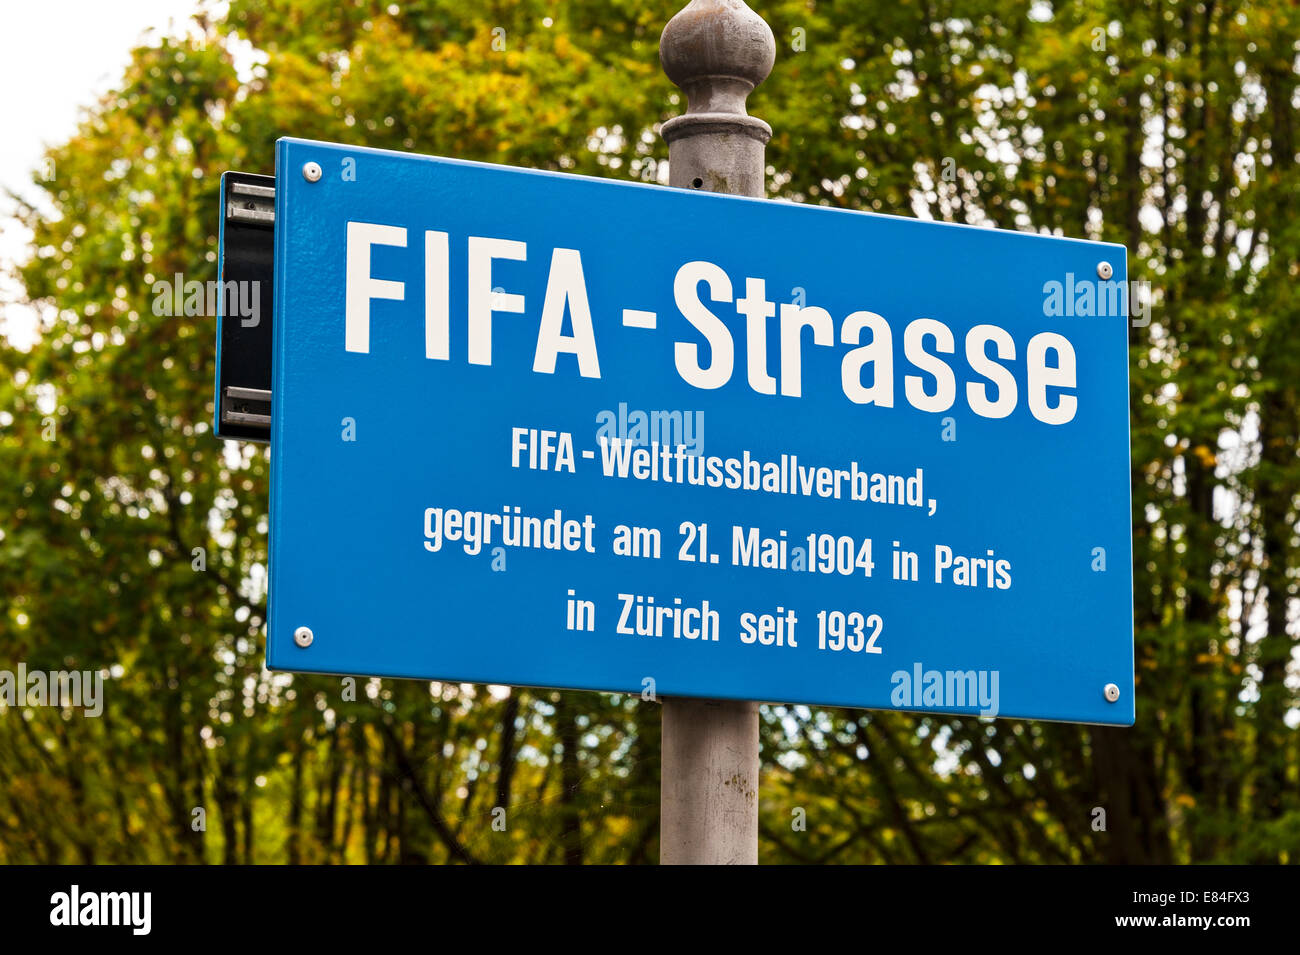 Street sign on the road leading up to the World Football Federation's (FIFA's) headquarters in Zurich, Switzerland. Stock Photo